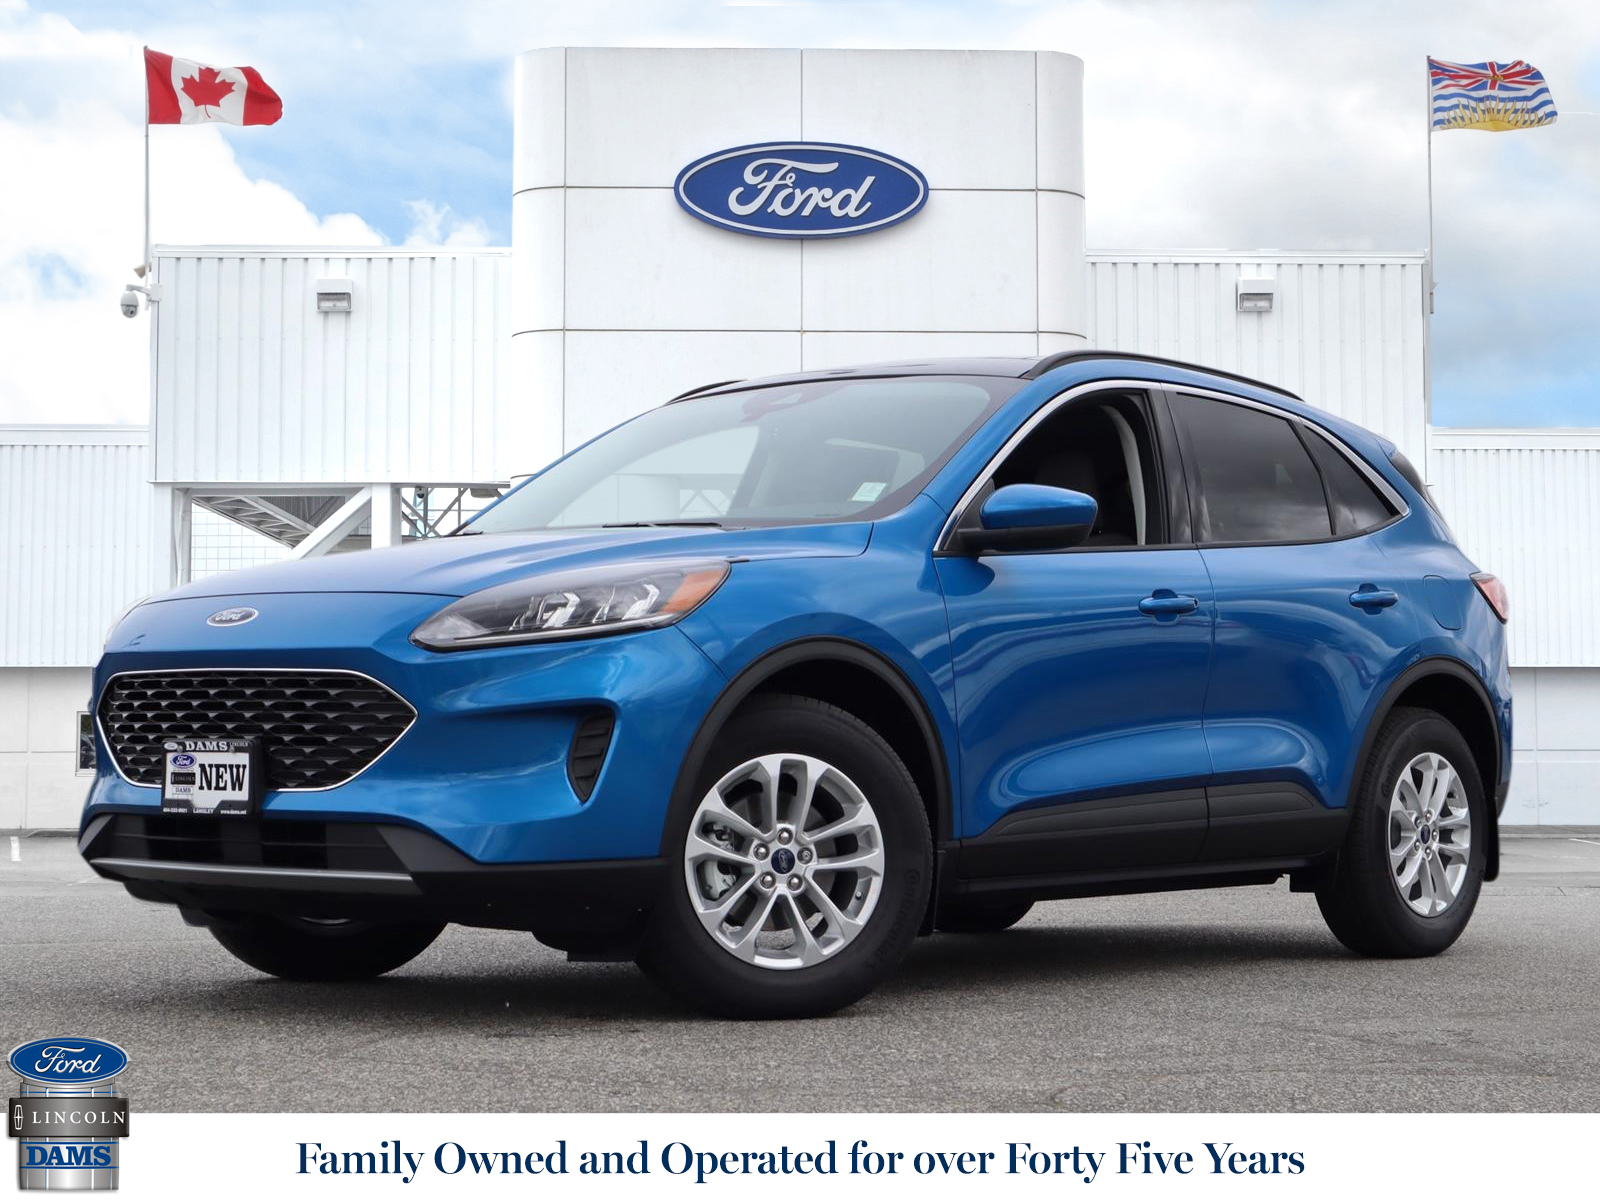 2021 Ford Escape Se Carbonized Grey 15l Ecoboost® Engine With Auto